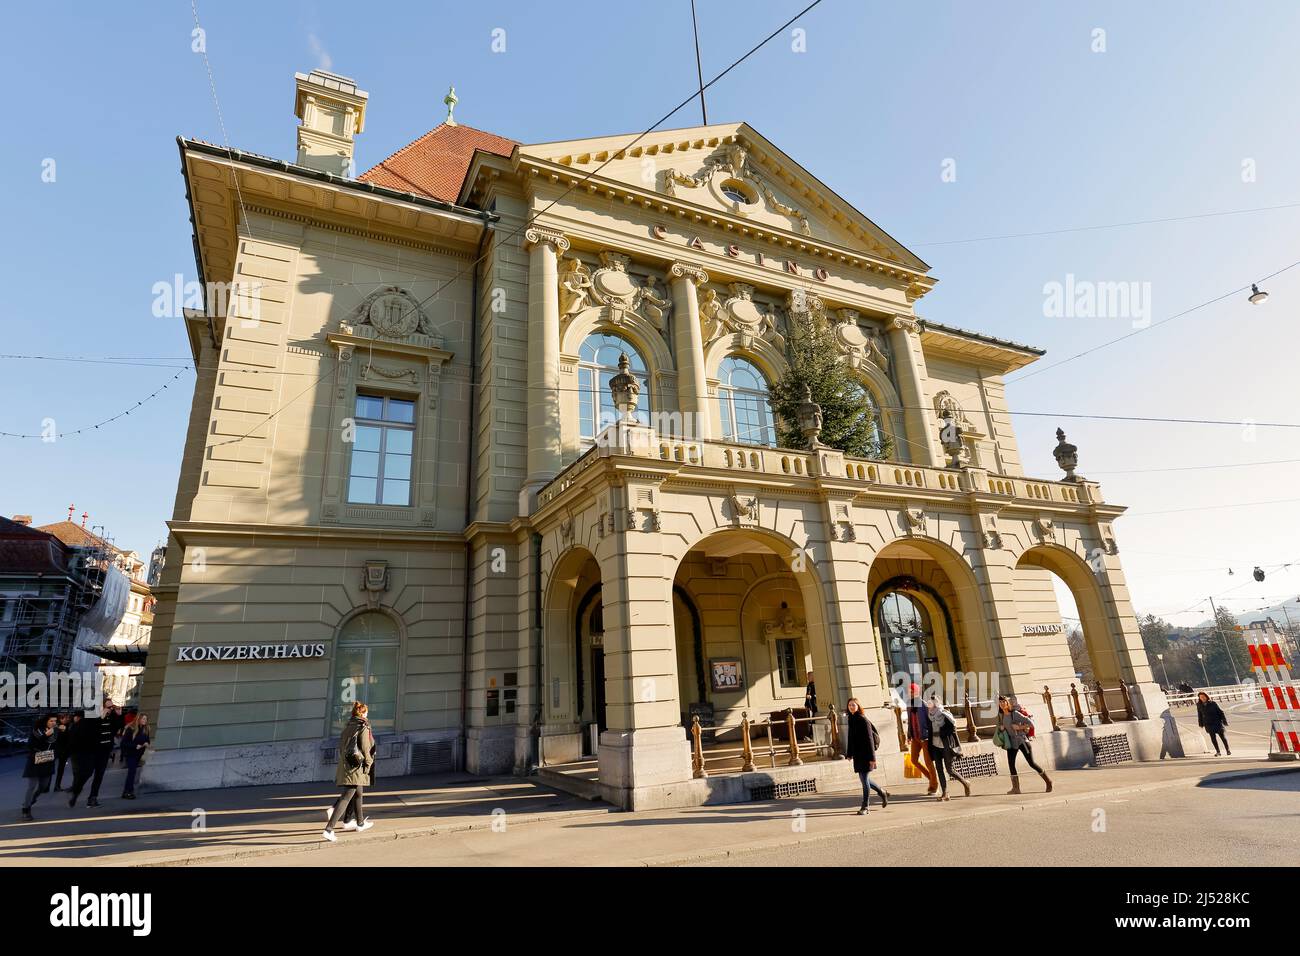 Bern, Switzerland - December 26, 2015: The building with a visible sign of Casino on it, was built in 1909, in fact it is a concert house (Kultur Casi Stock Photo